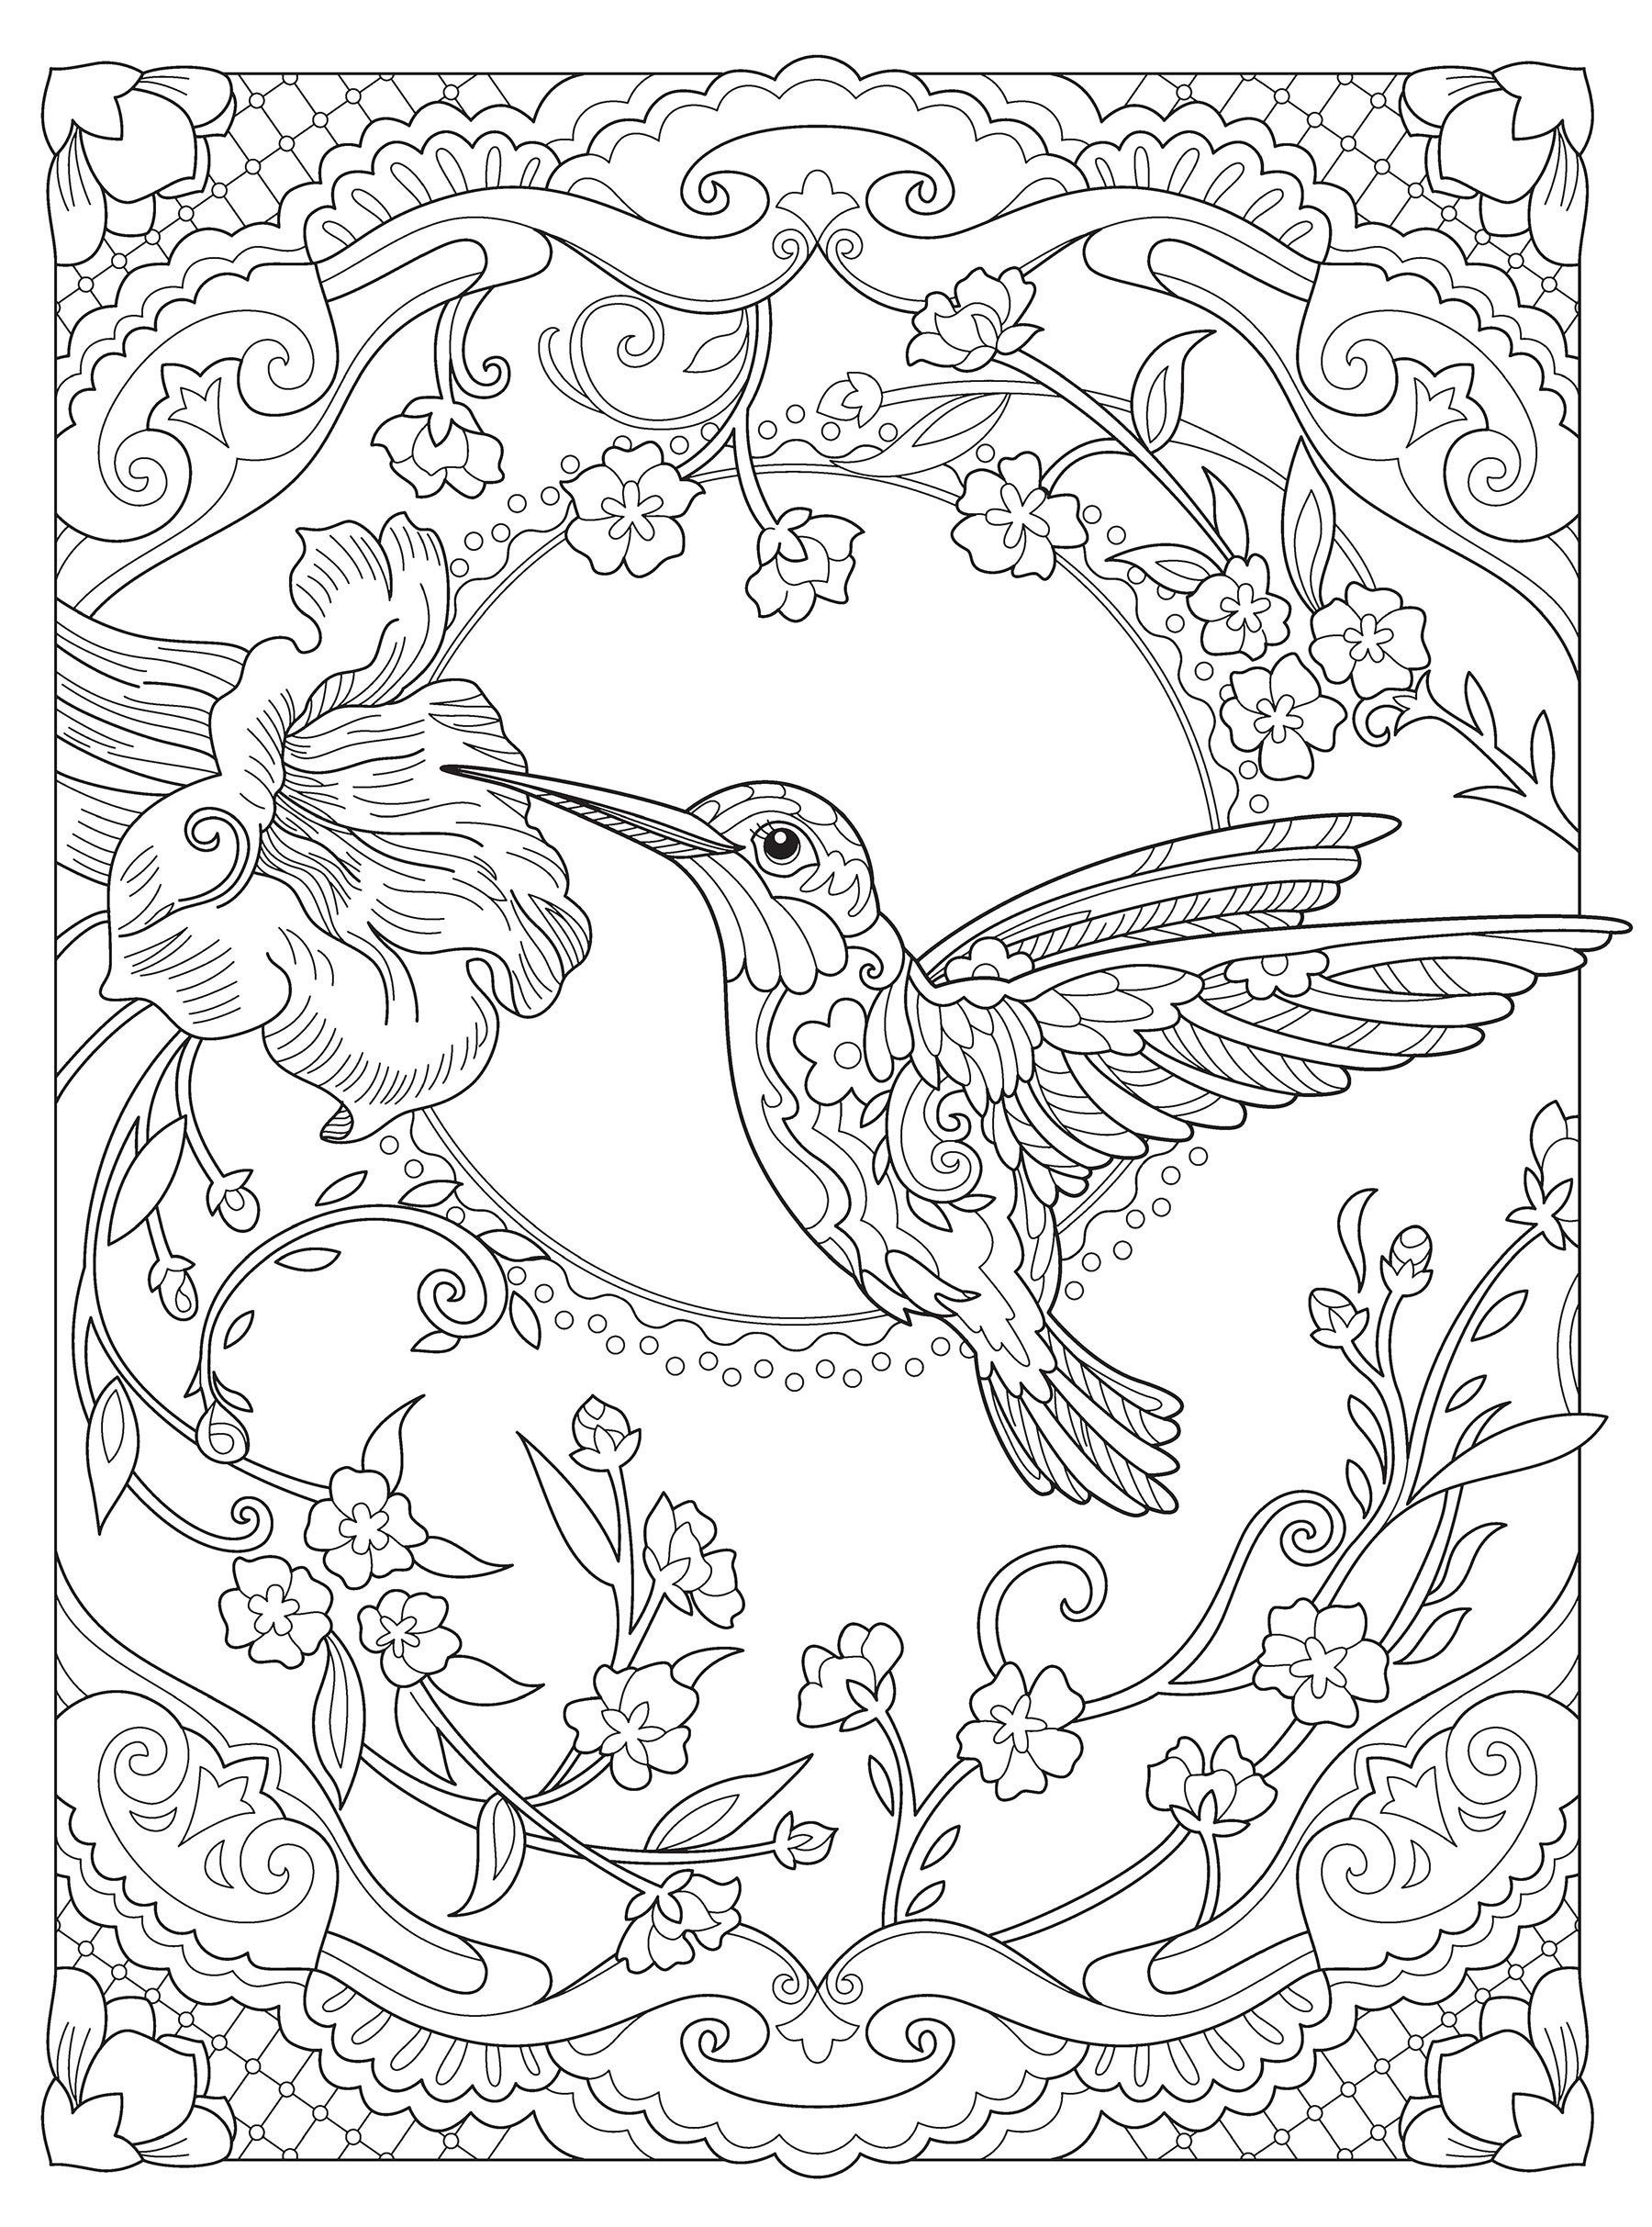 creative coloring sheets creative coloring pages to download and print for free sheets coloring creative 